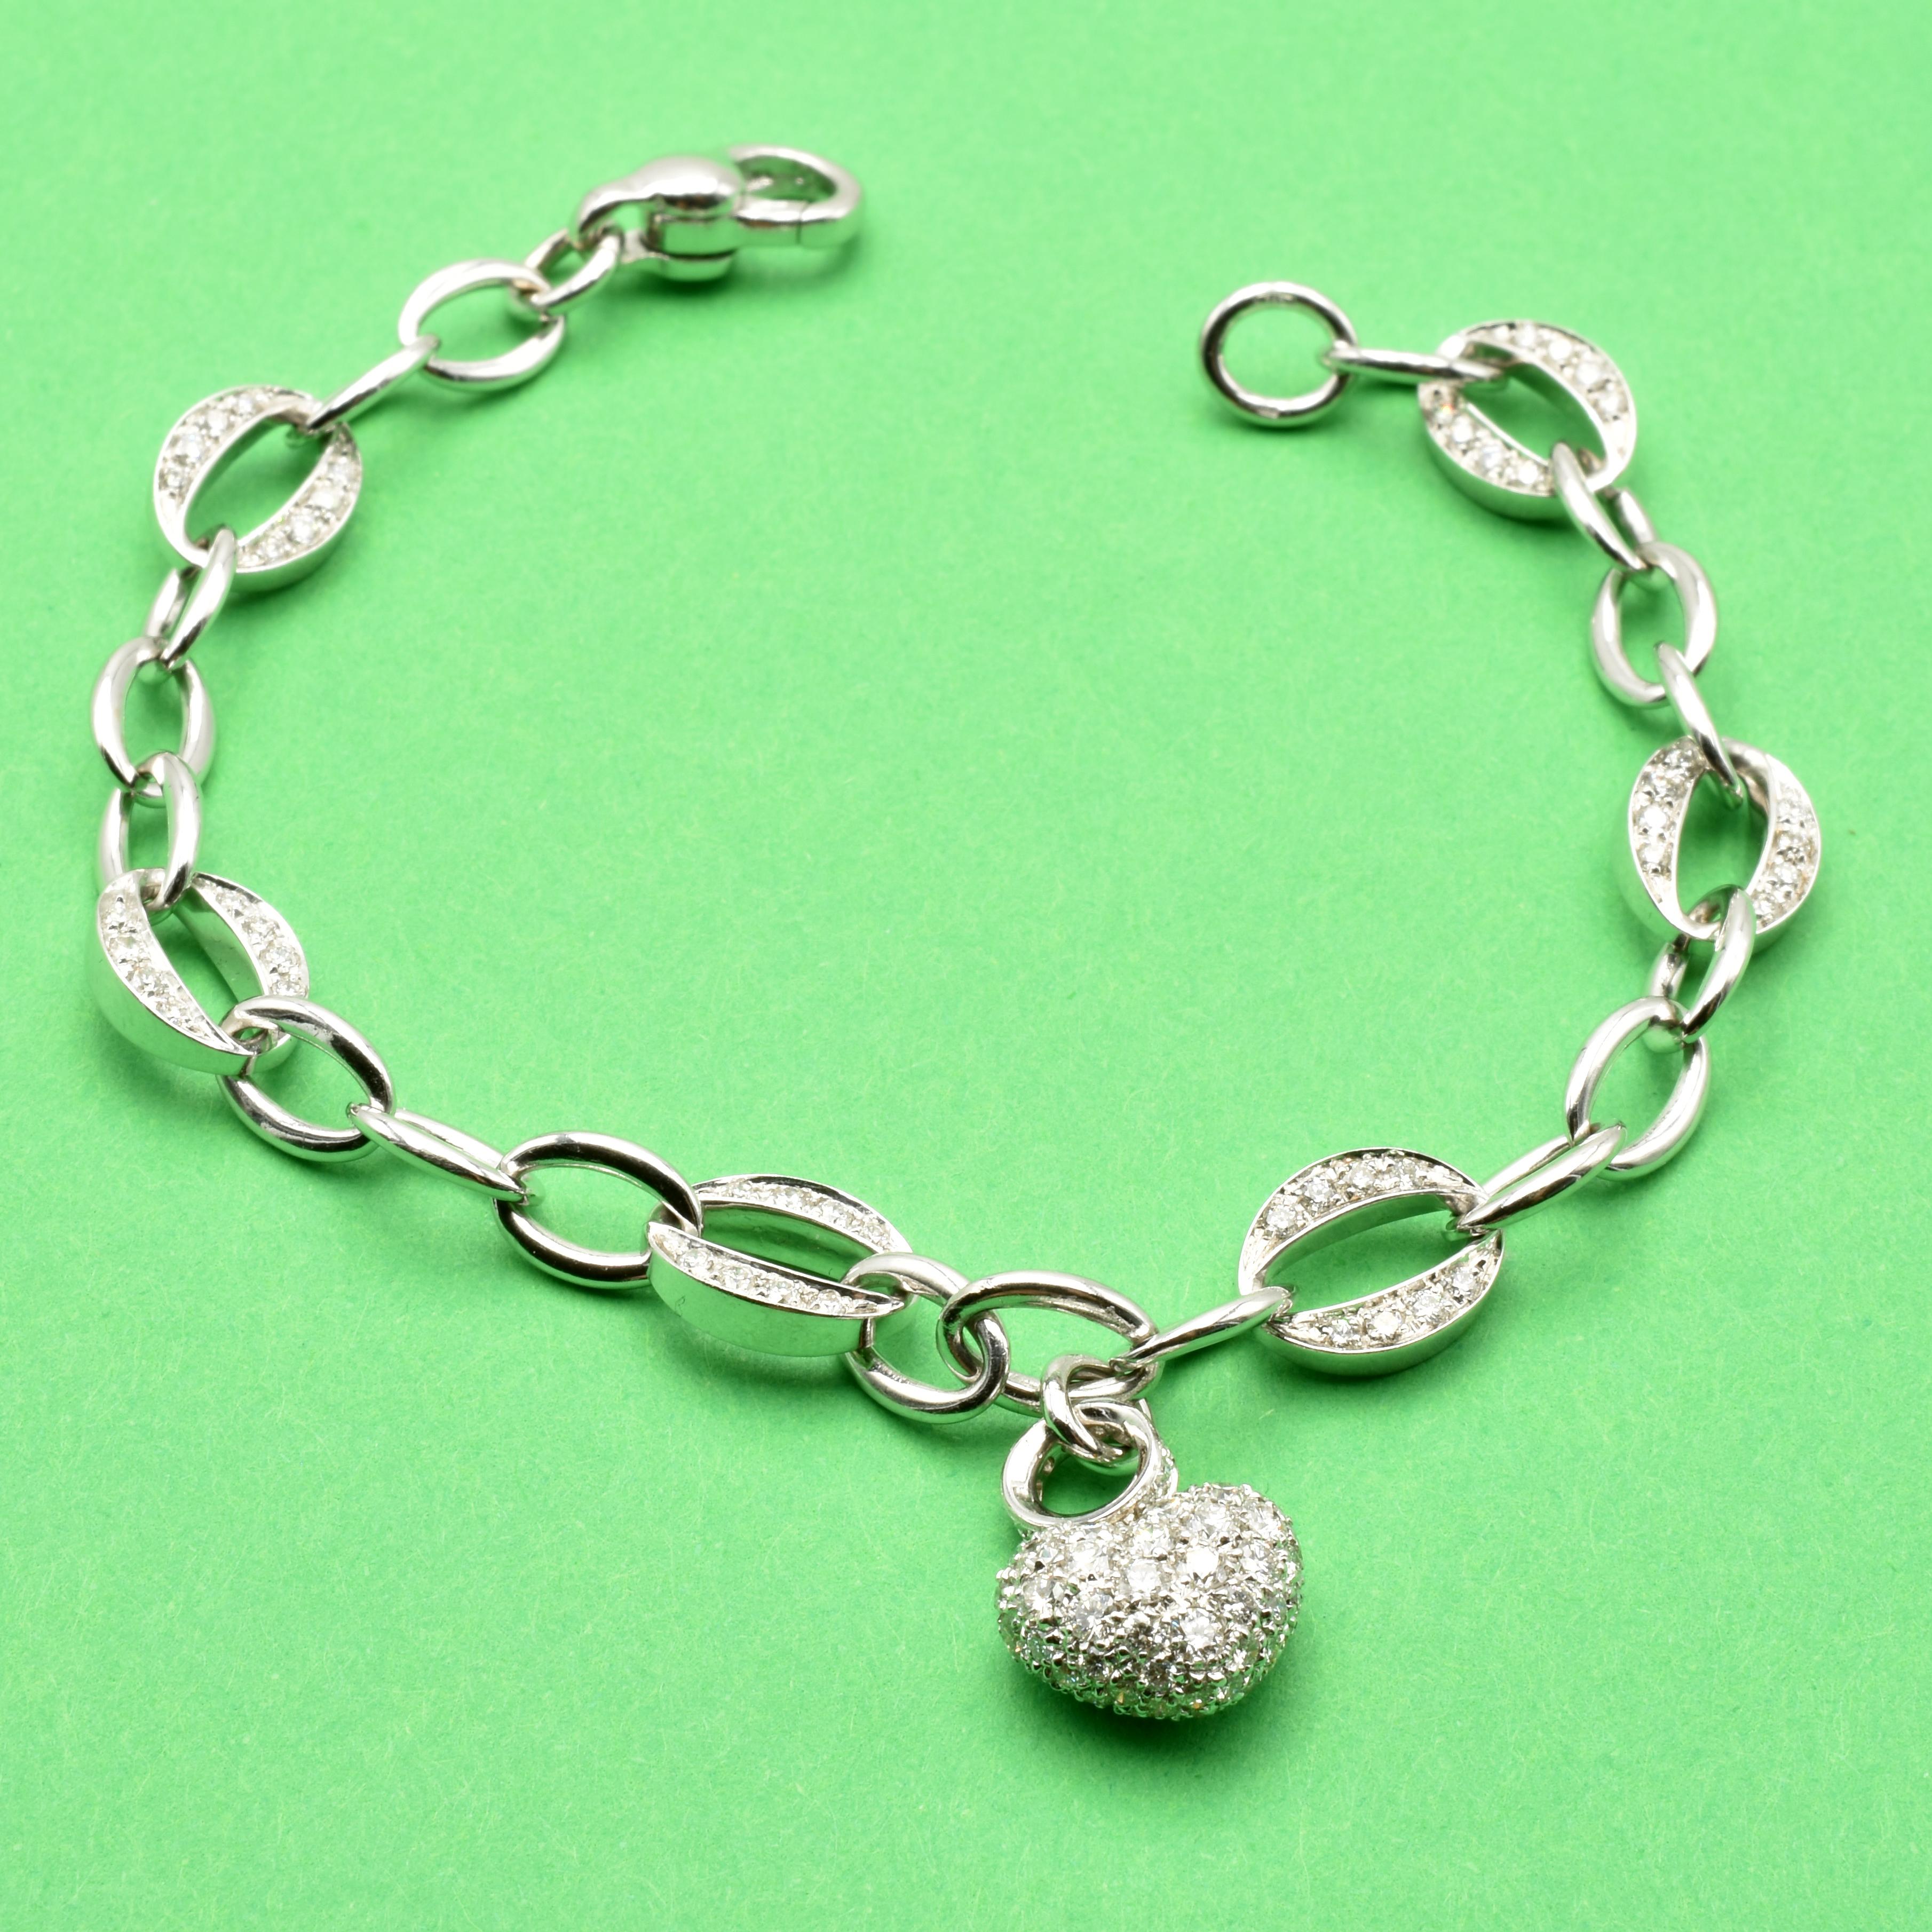 Contemporary White Gold Heart Charm Bracelet with Diamonds Made in Italy For Sale